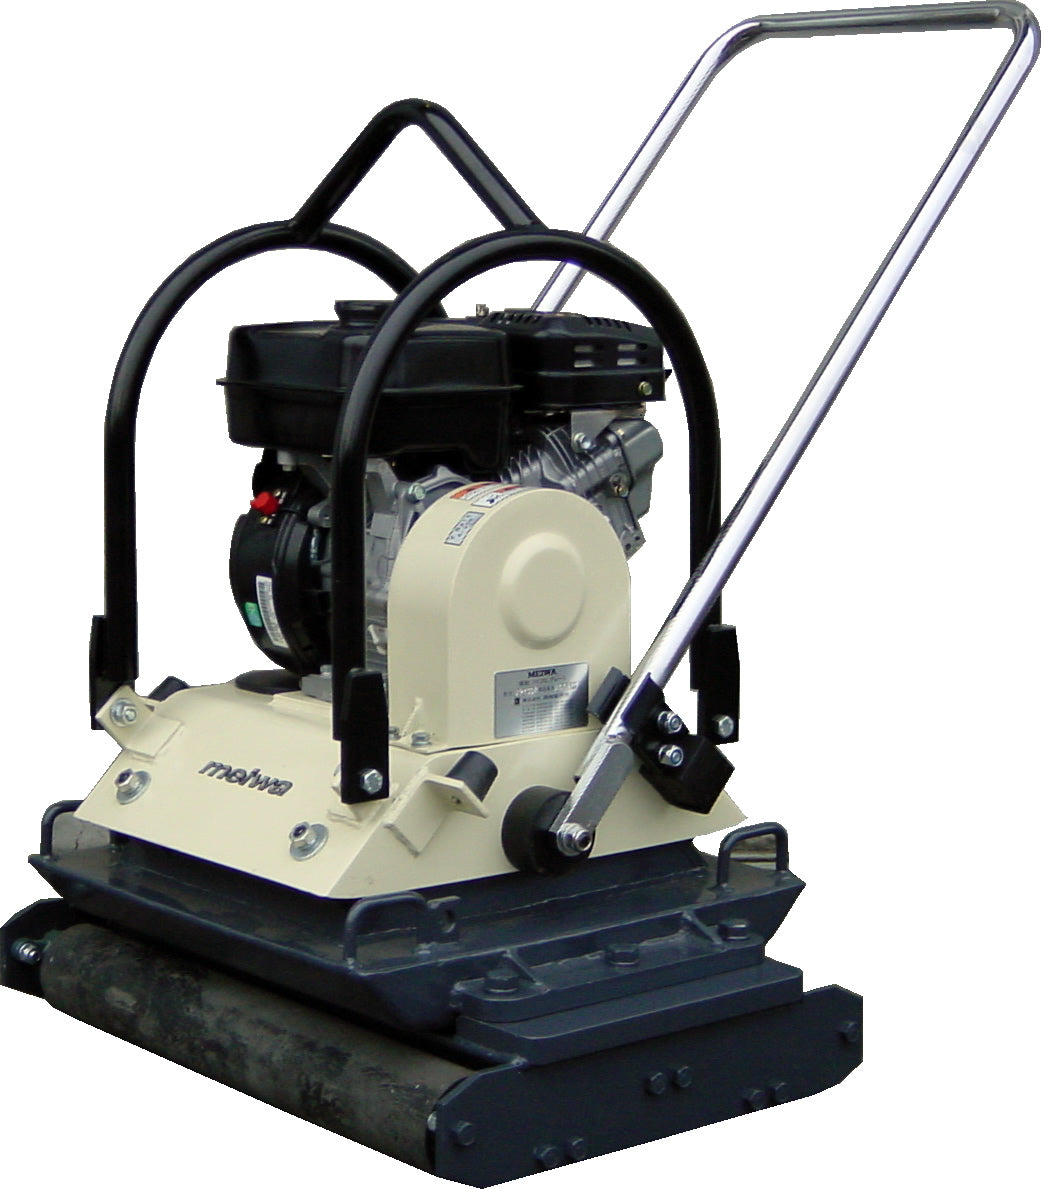 VP100R Plate Compactor